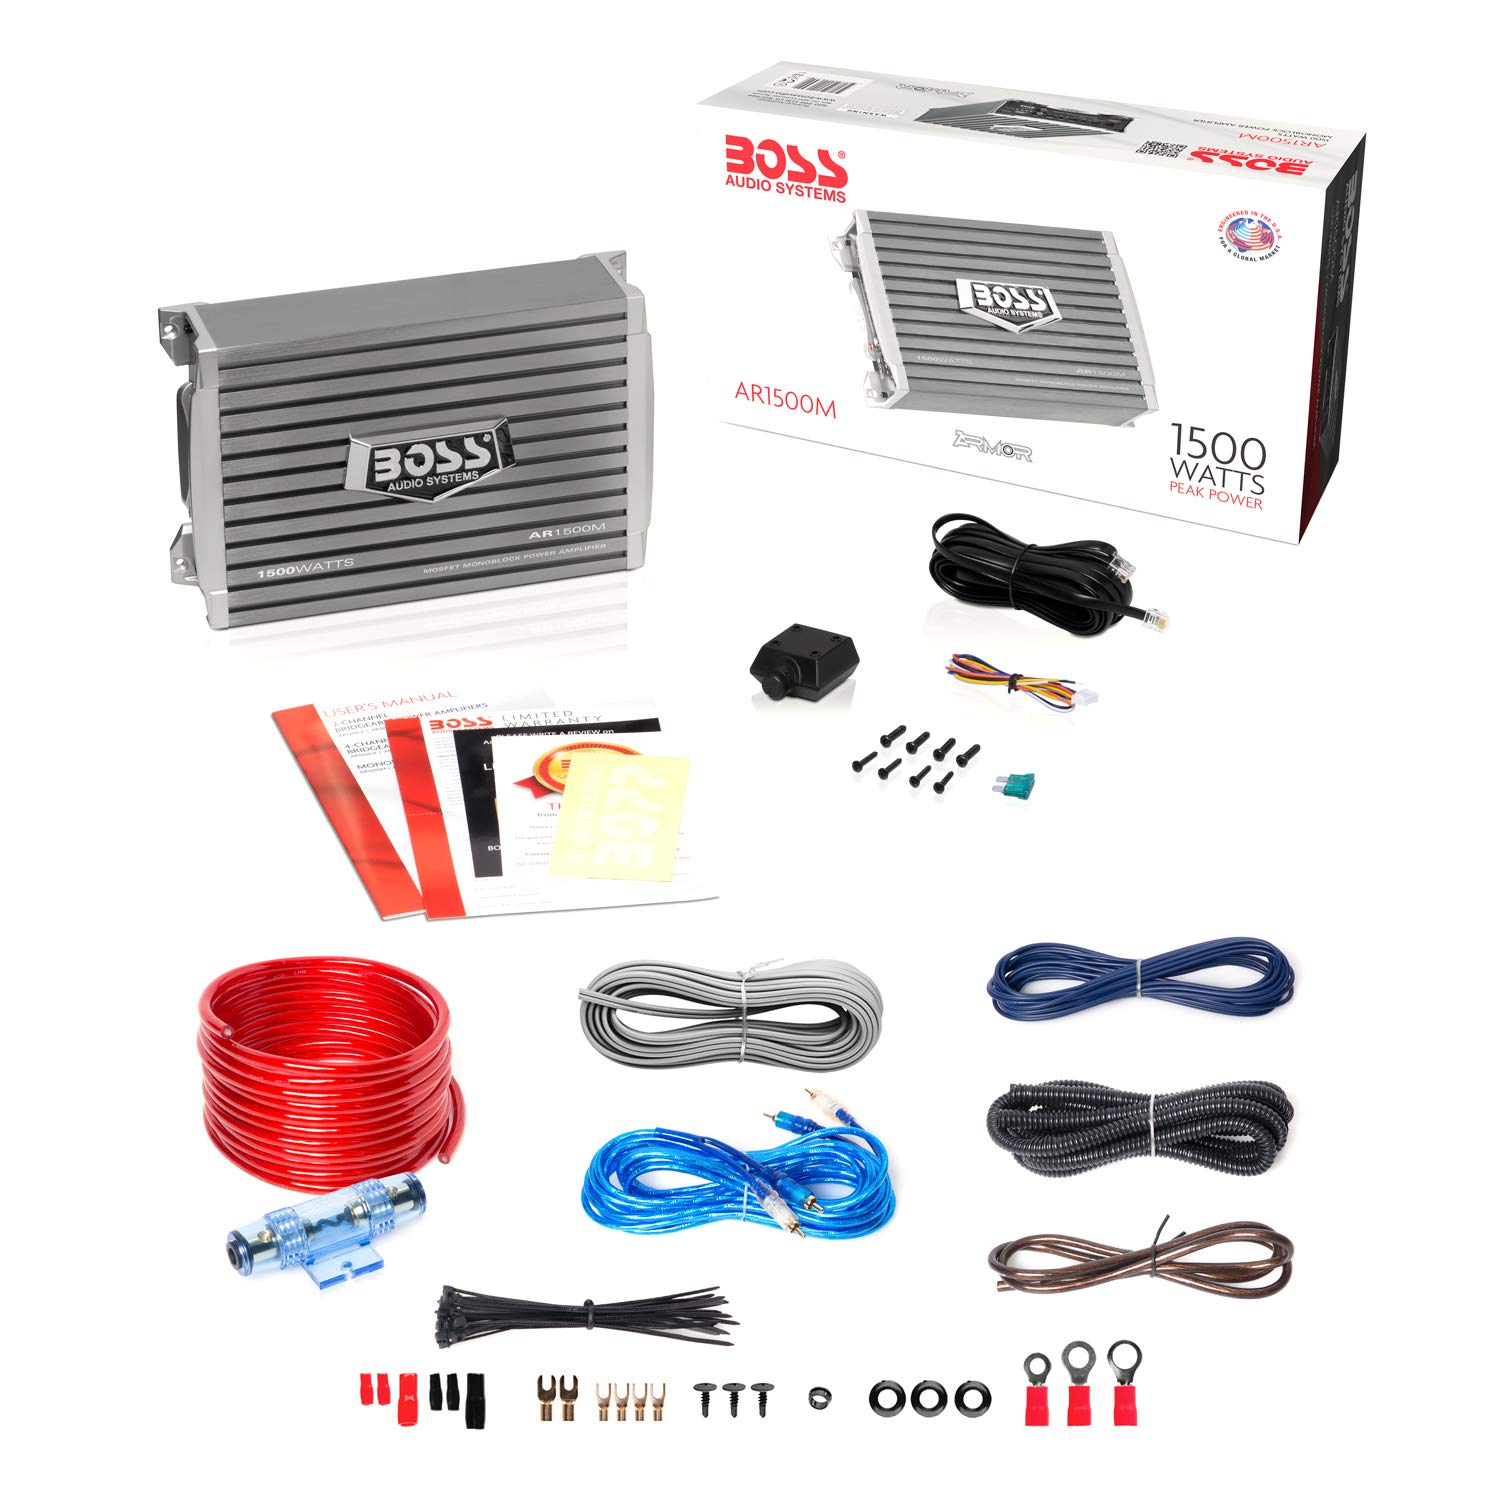 Mua BOSS Audio Systems AR1500MK Car Amplifier and Gauge Wiring Kit 1500  Watts Max Power, 2/4 Ohm Stable, Class AB, Monoblock, Mosfet Power Supply, Remote  Subwoofer Control trên Amazon Mỹ chính hãng 2023 Giaonhan247